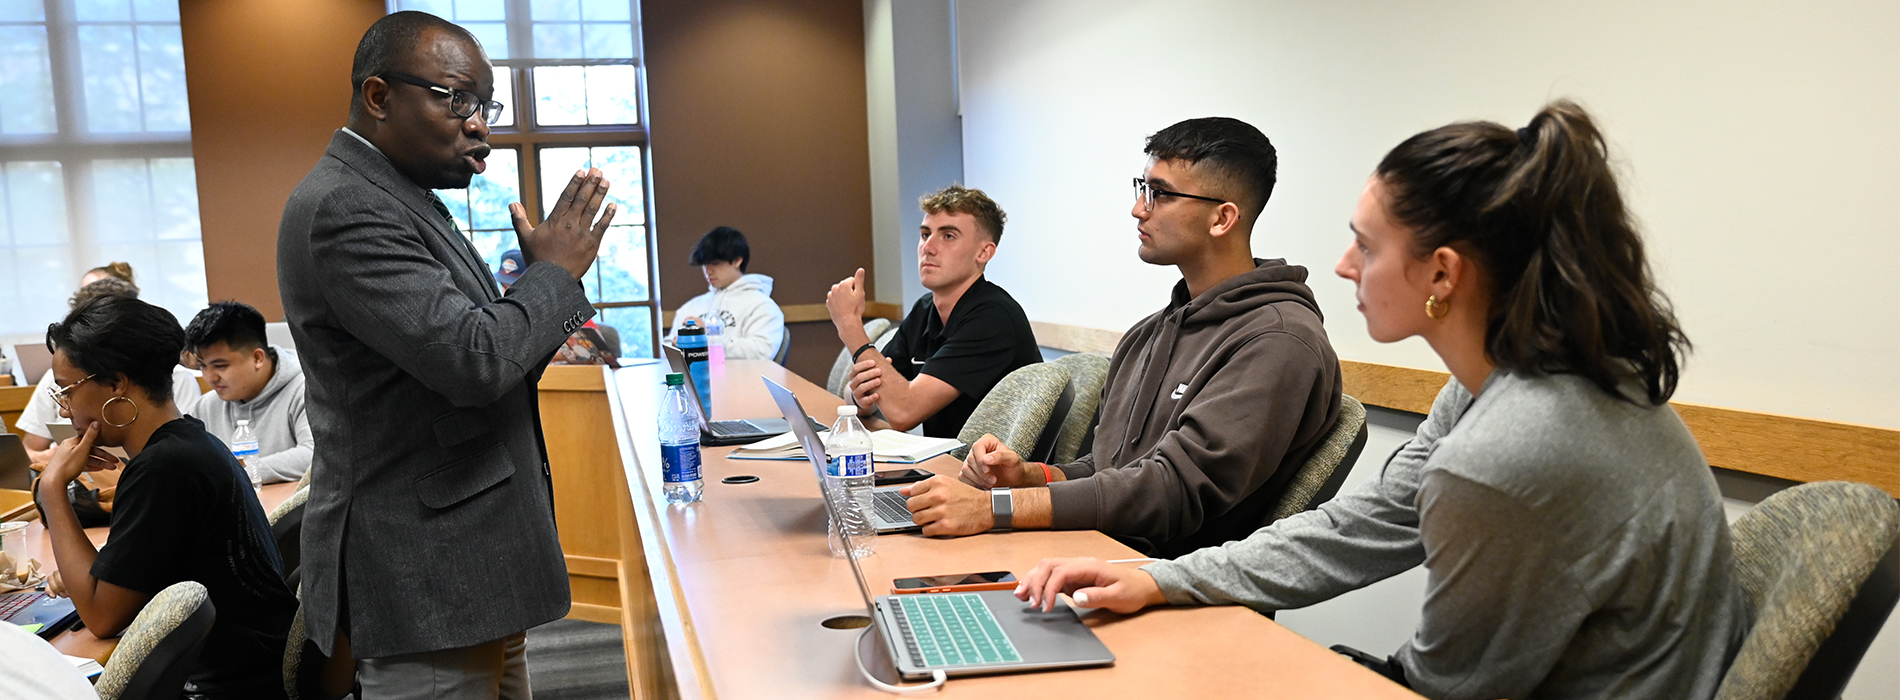 A professor stands and talks to three students sitting in a business classroom. Other students sit in chairs nearby.